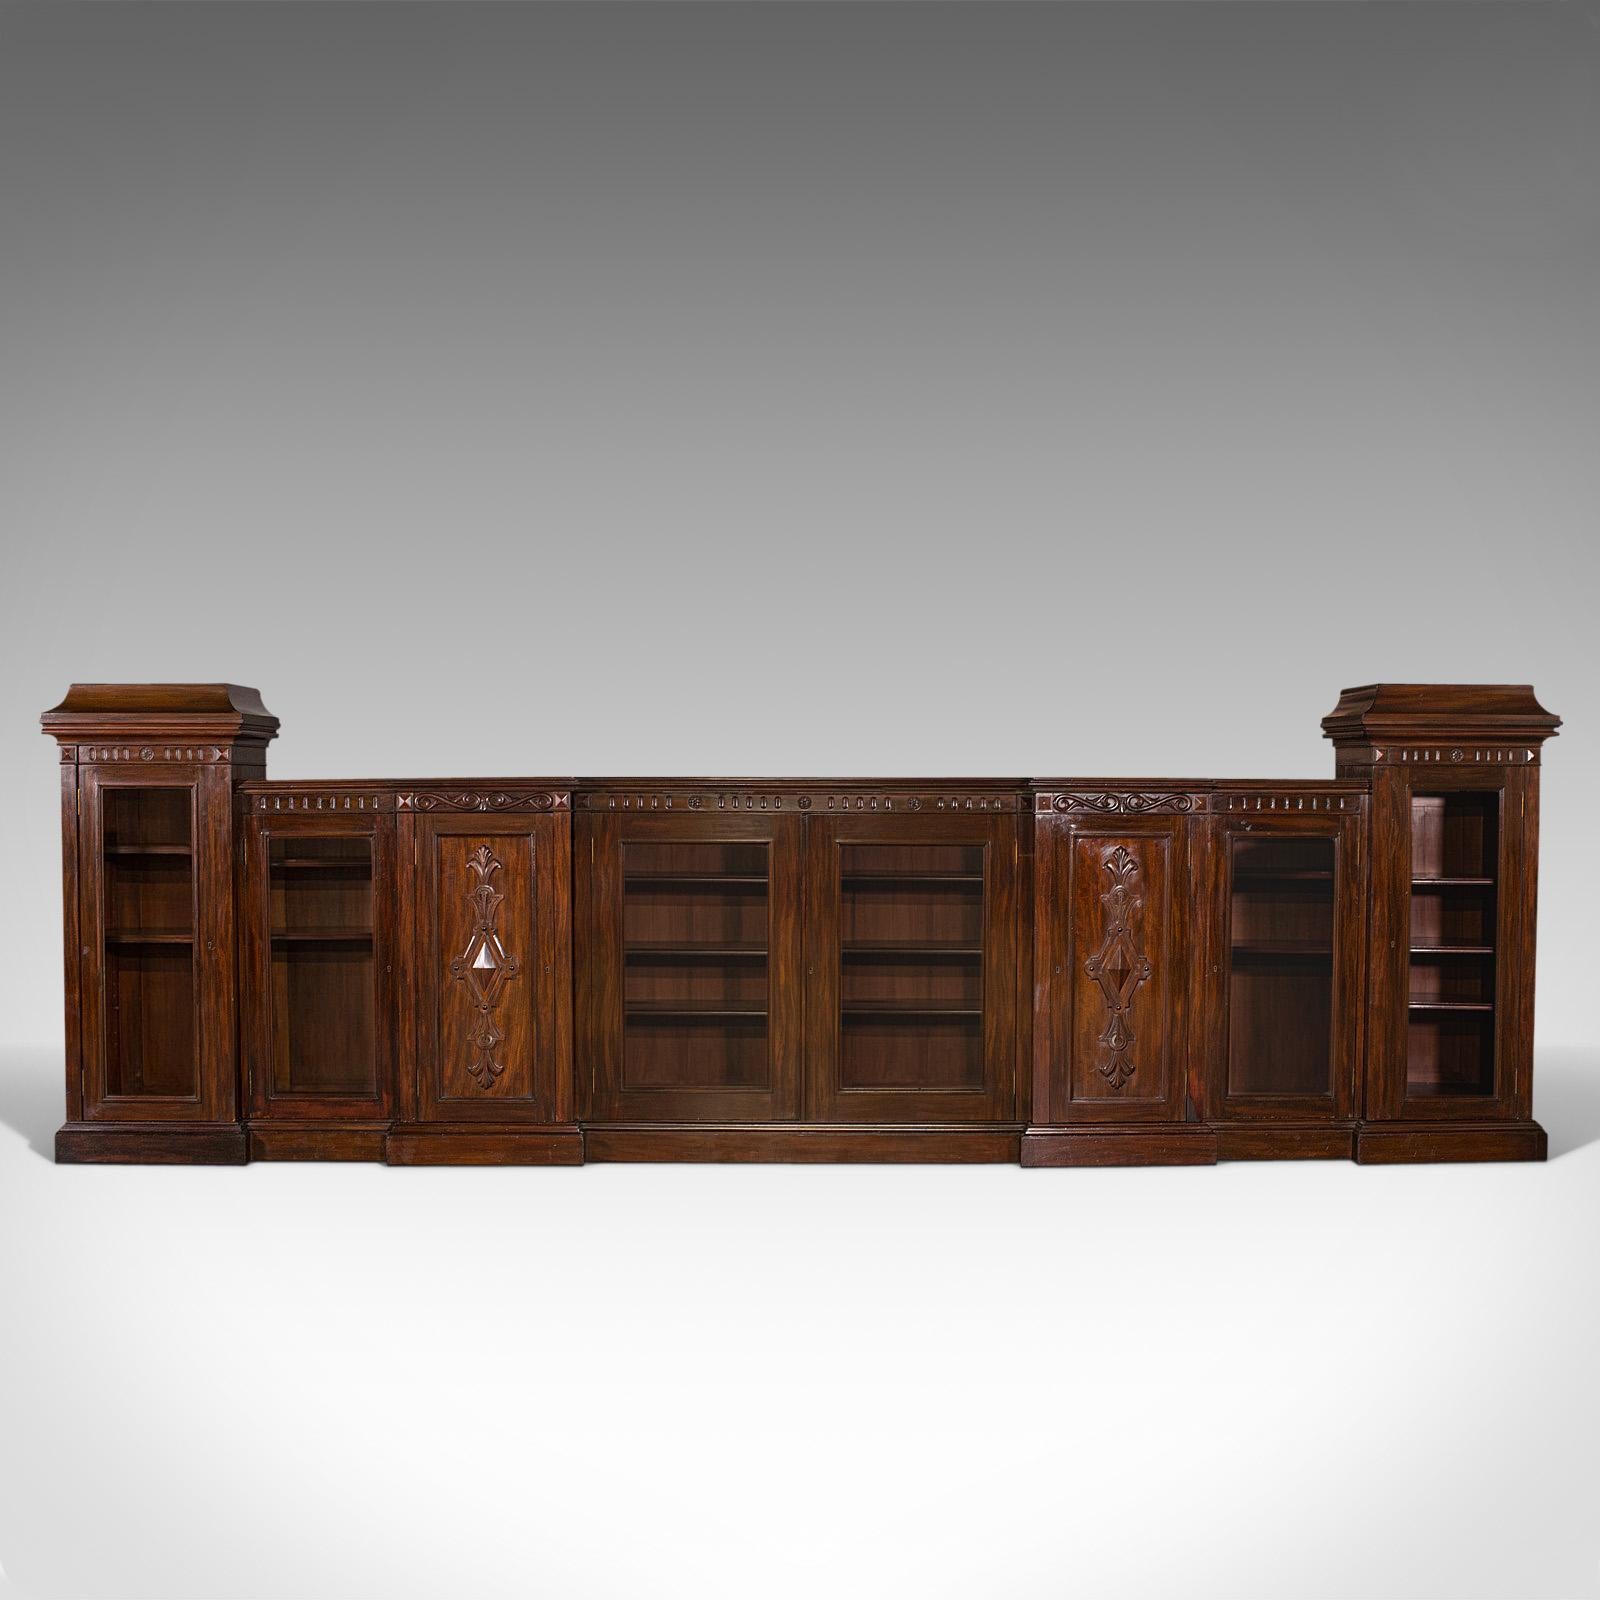 This is a very large antique glazed bookcase. An English, mahogany breakfront library cabinet, dating to the Victorian period, circa 1880.

Truly arresting proportion at a width of 15 feet
Displaying a desirable aged patina throughout
Select